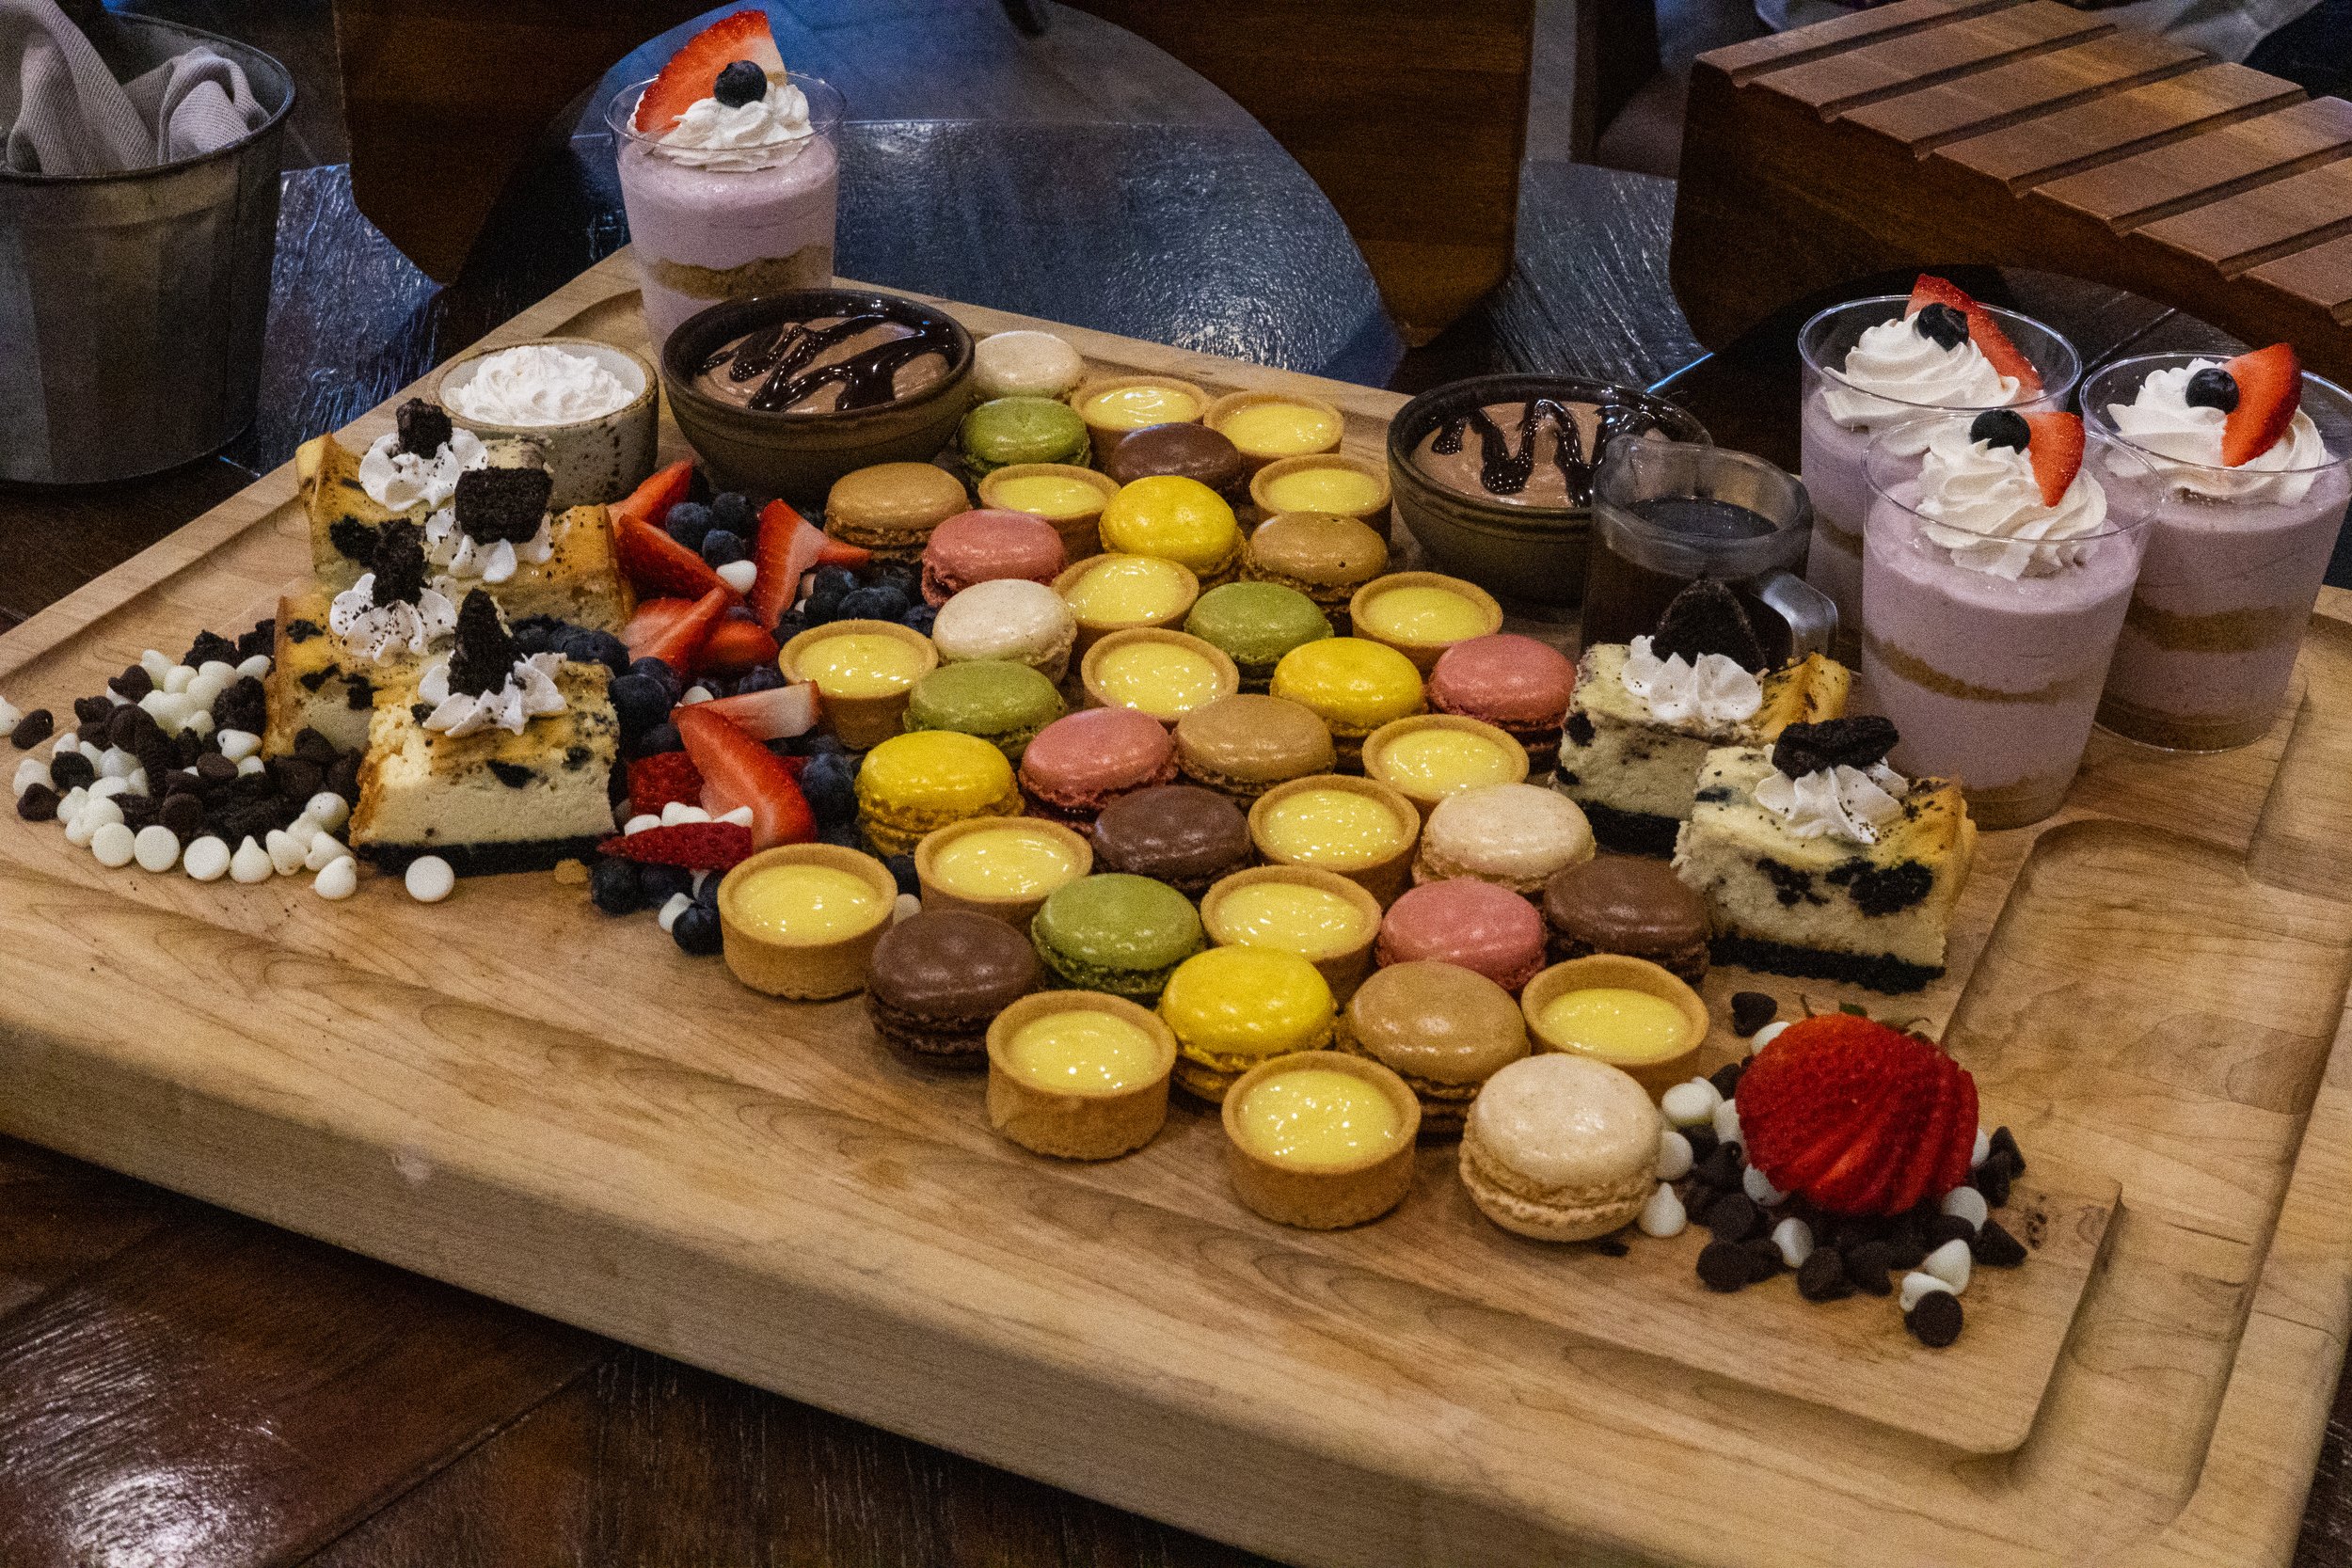 A dessert spread, including macarons and mousse.